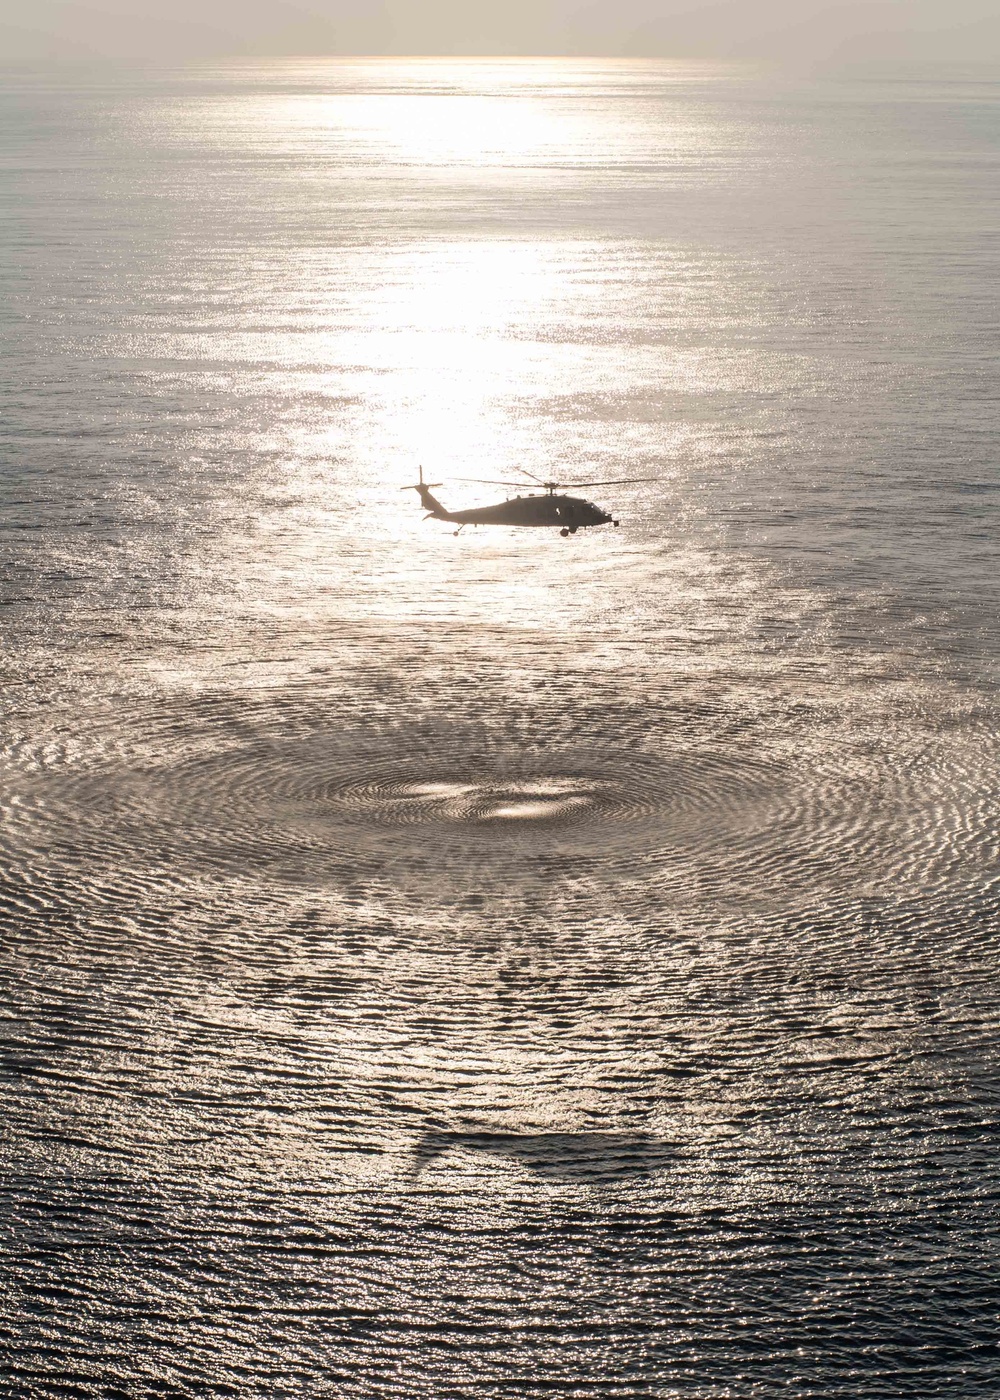 EOD Mobile Unit 3 conducts mine countermeasures training from an MH-60S Sea Hawk